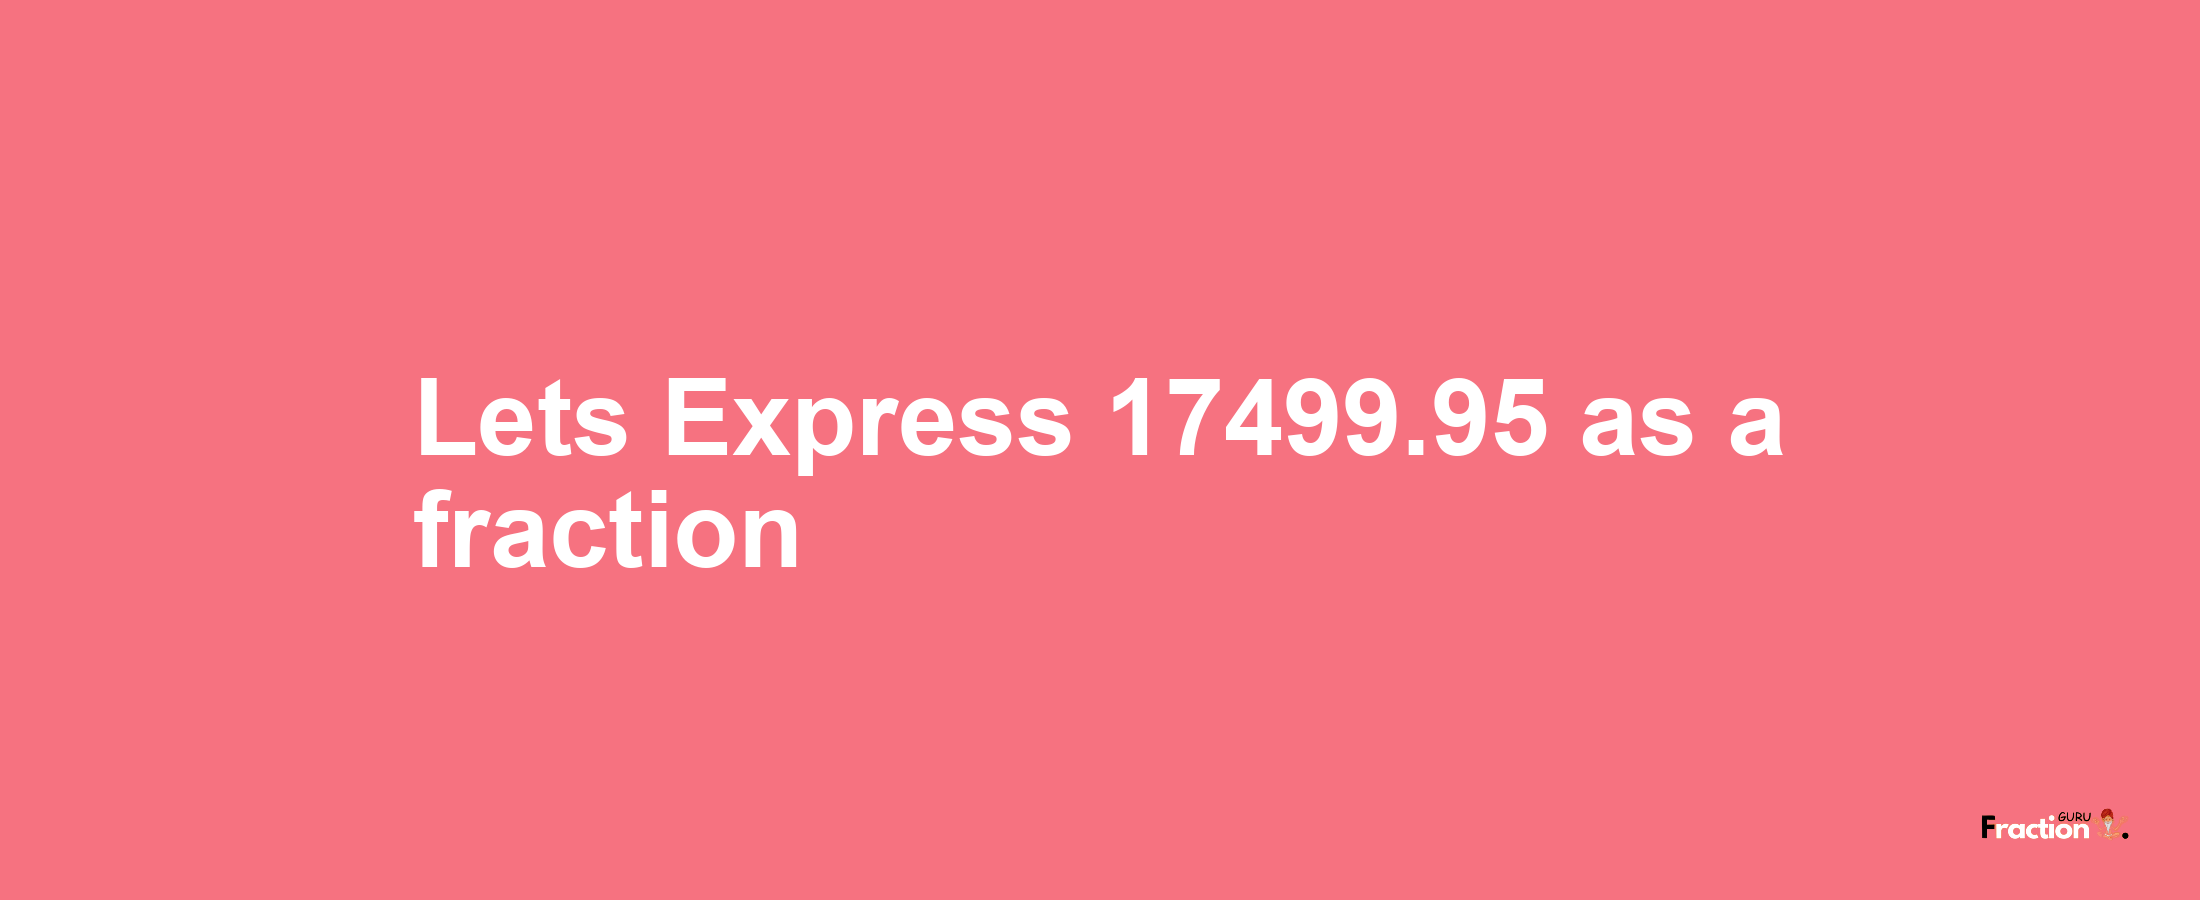 Lets Express 17499.95 as afraction